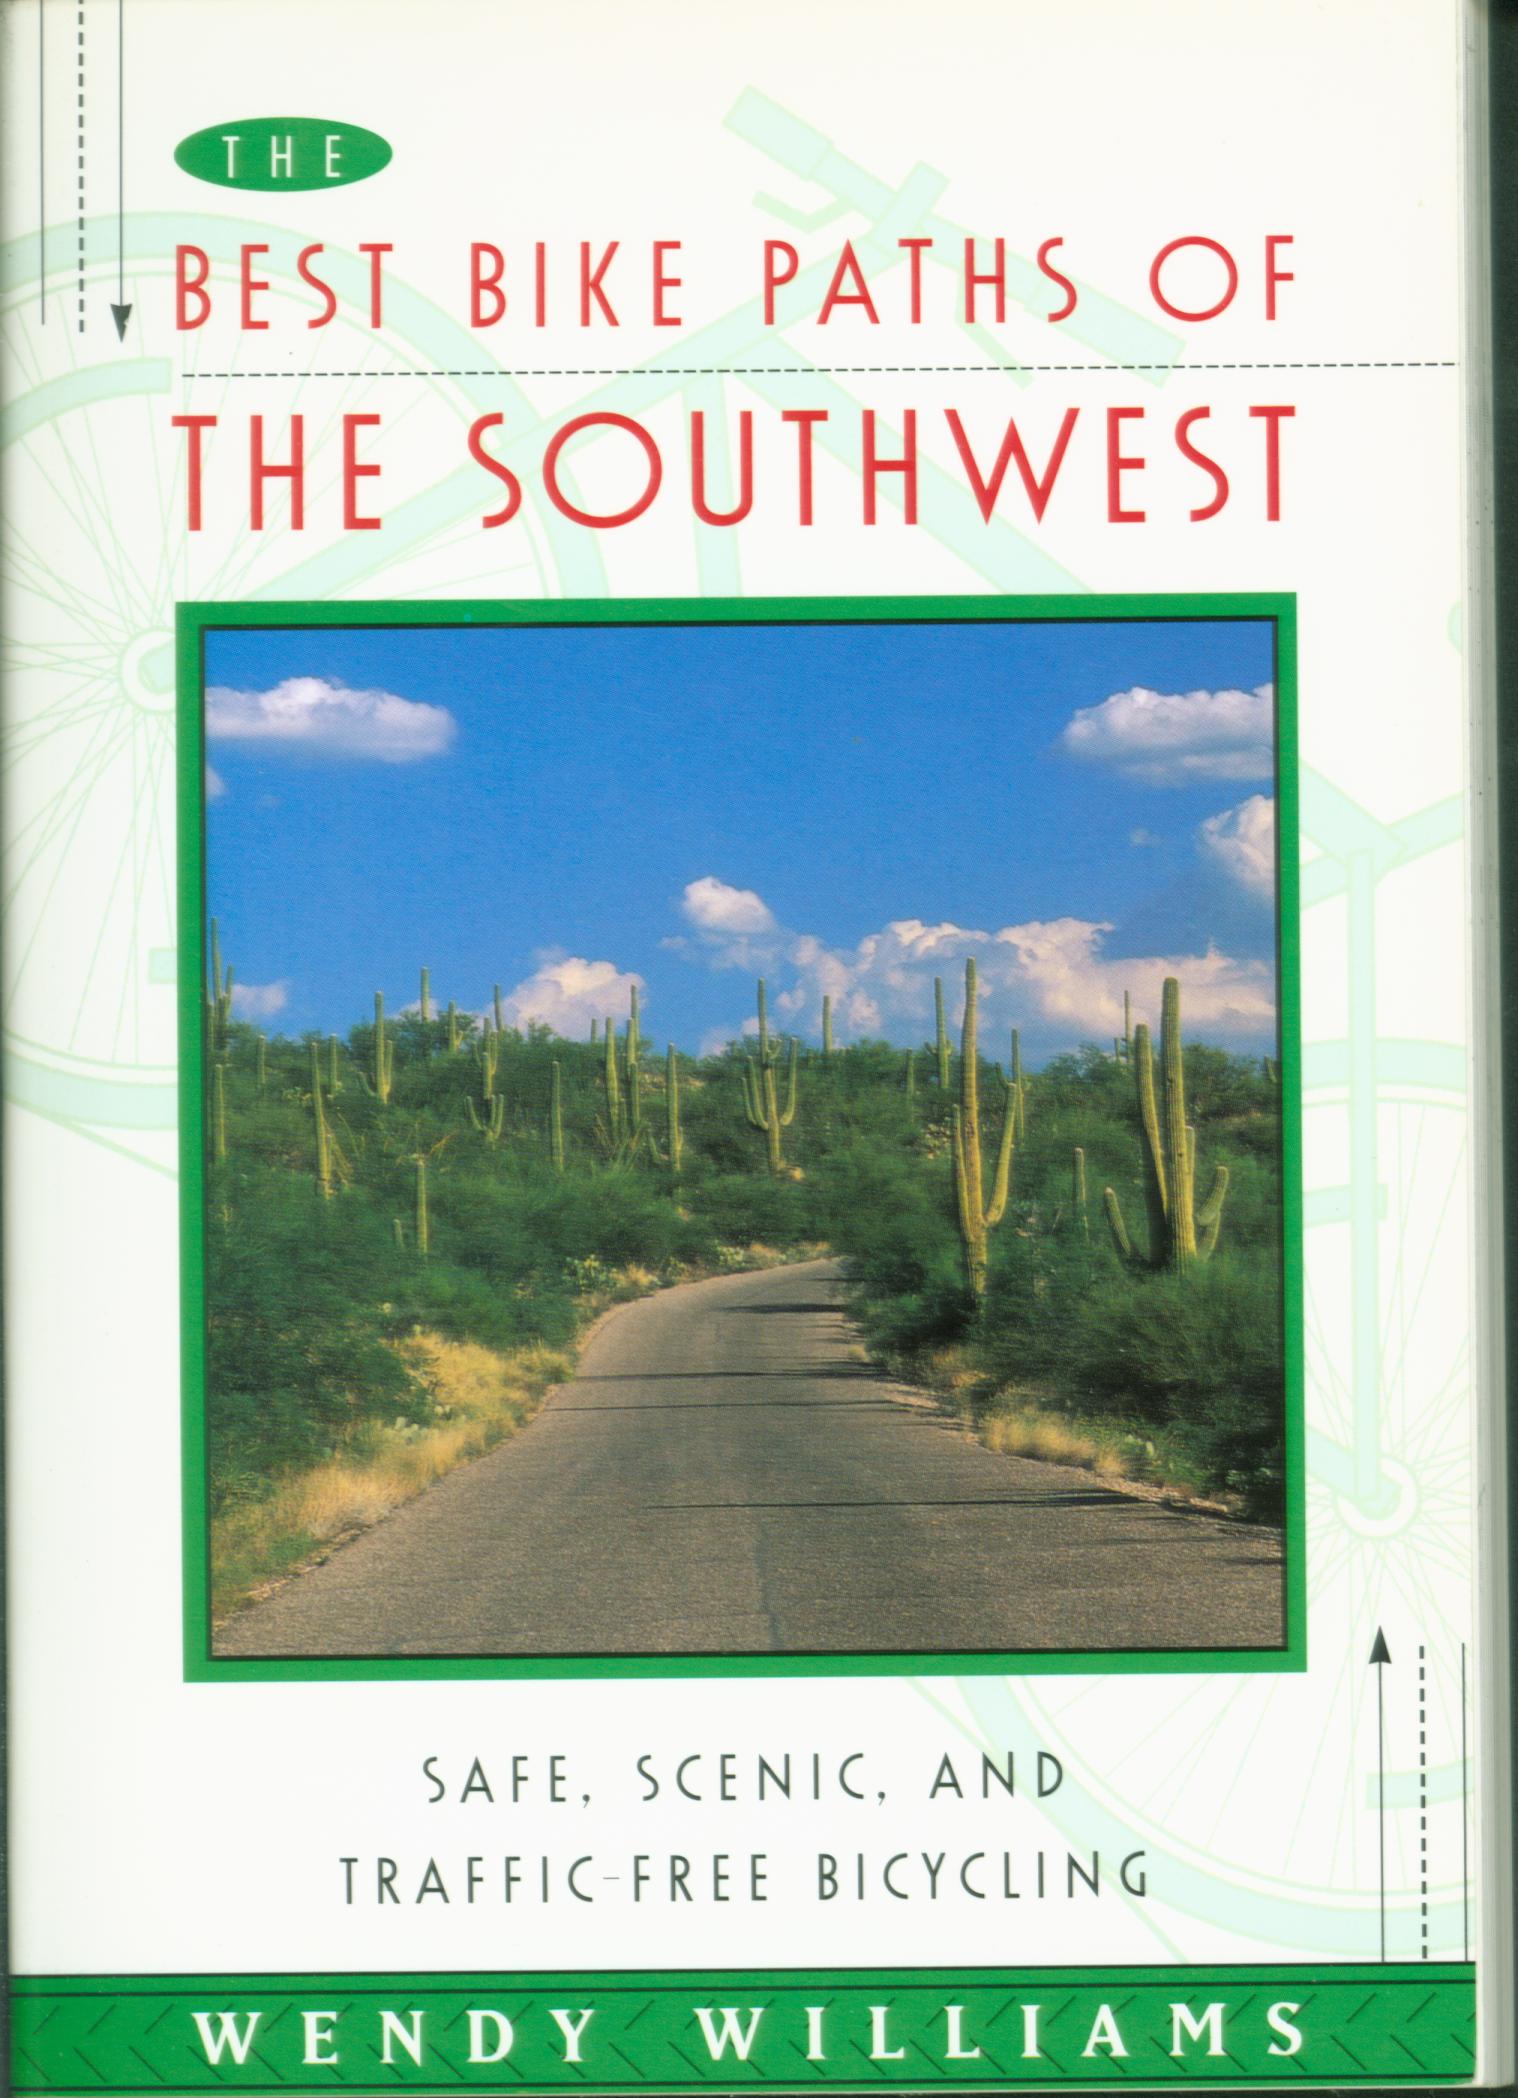 THE BEST BIKE PATHS OF THE SOUTHWEST. by Wendy Williams. 